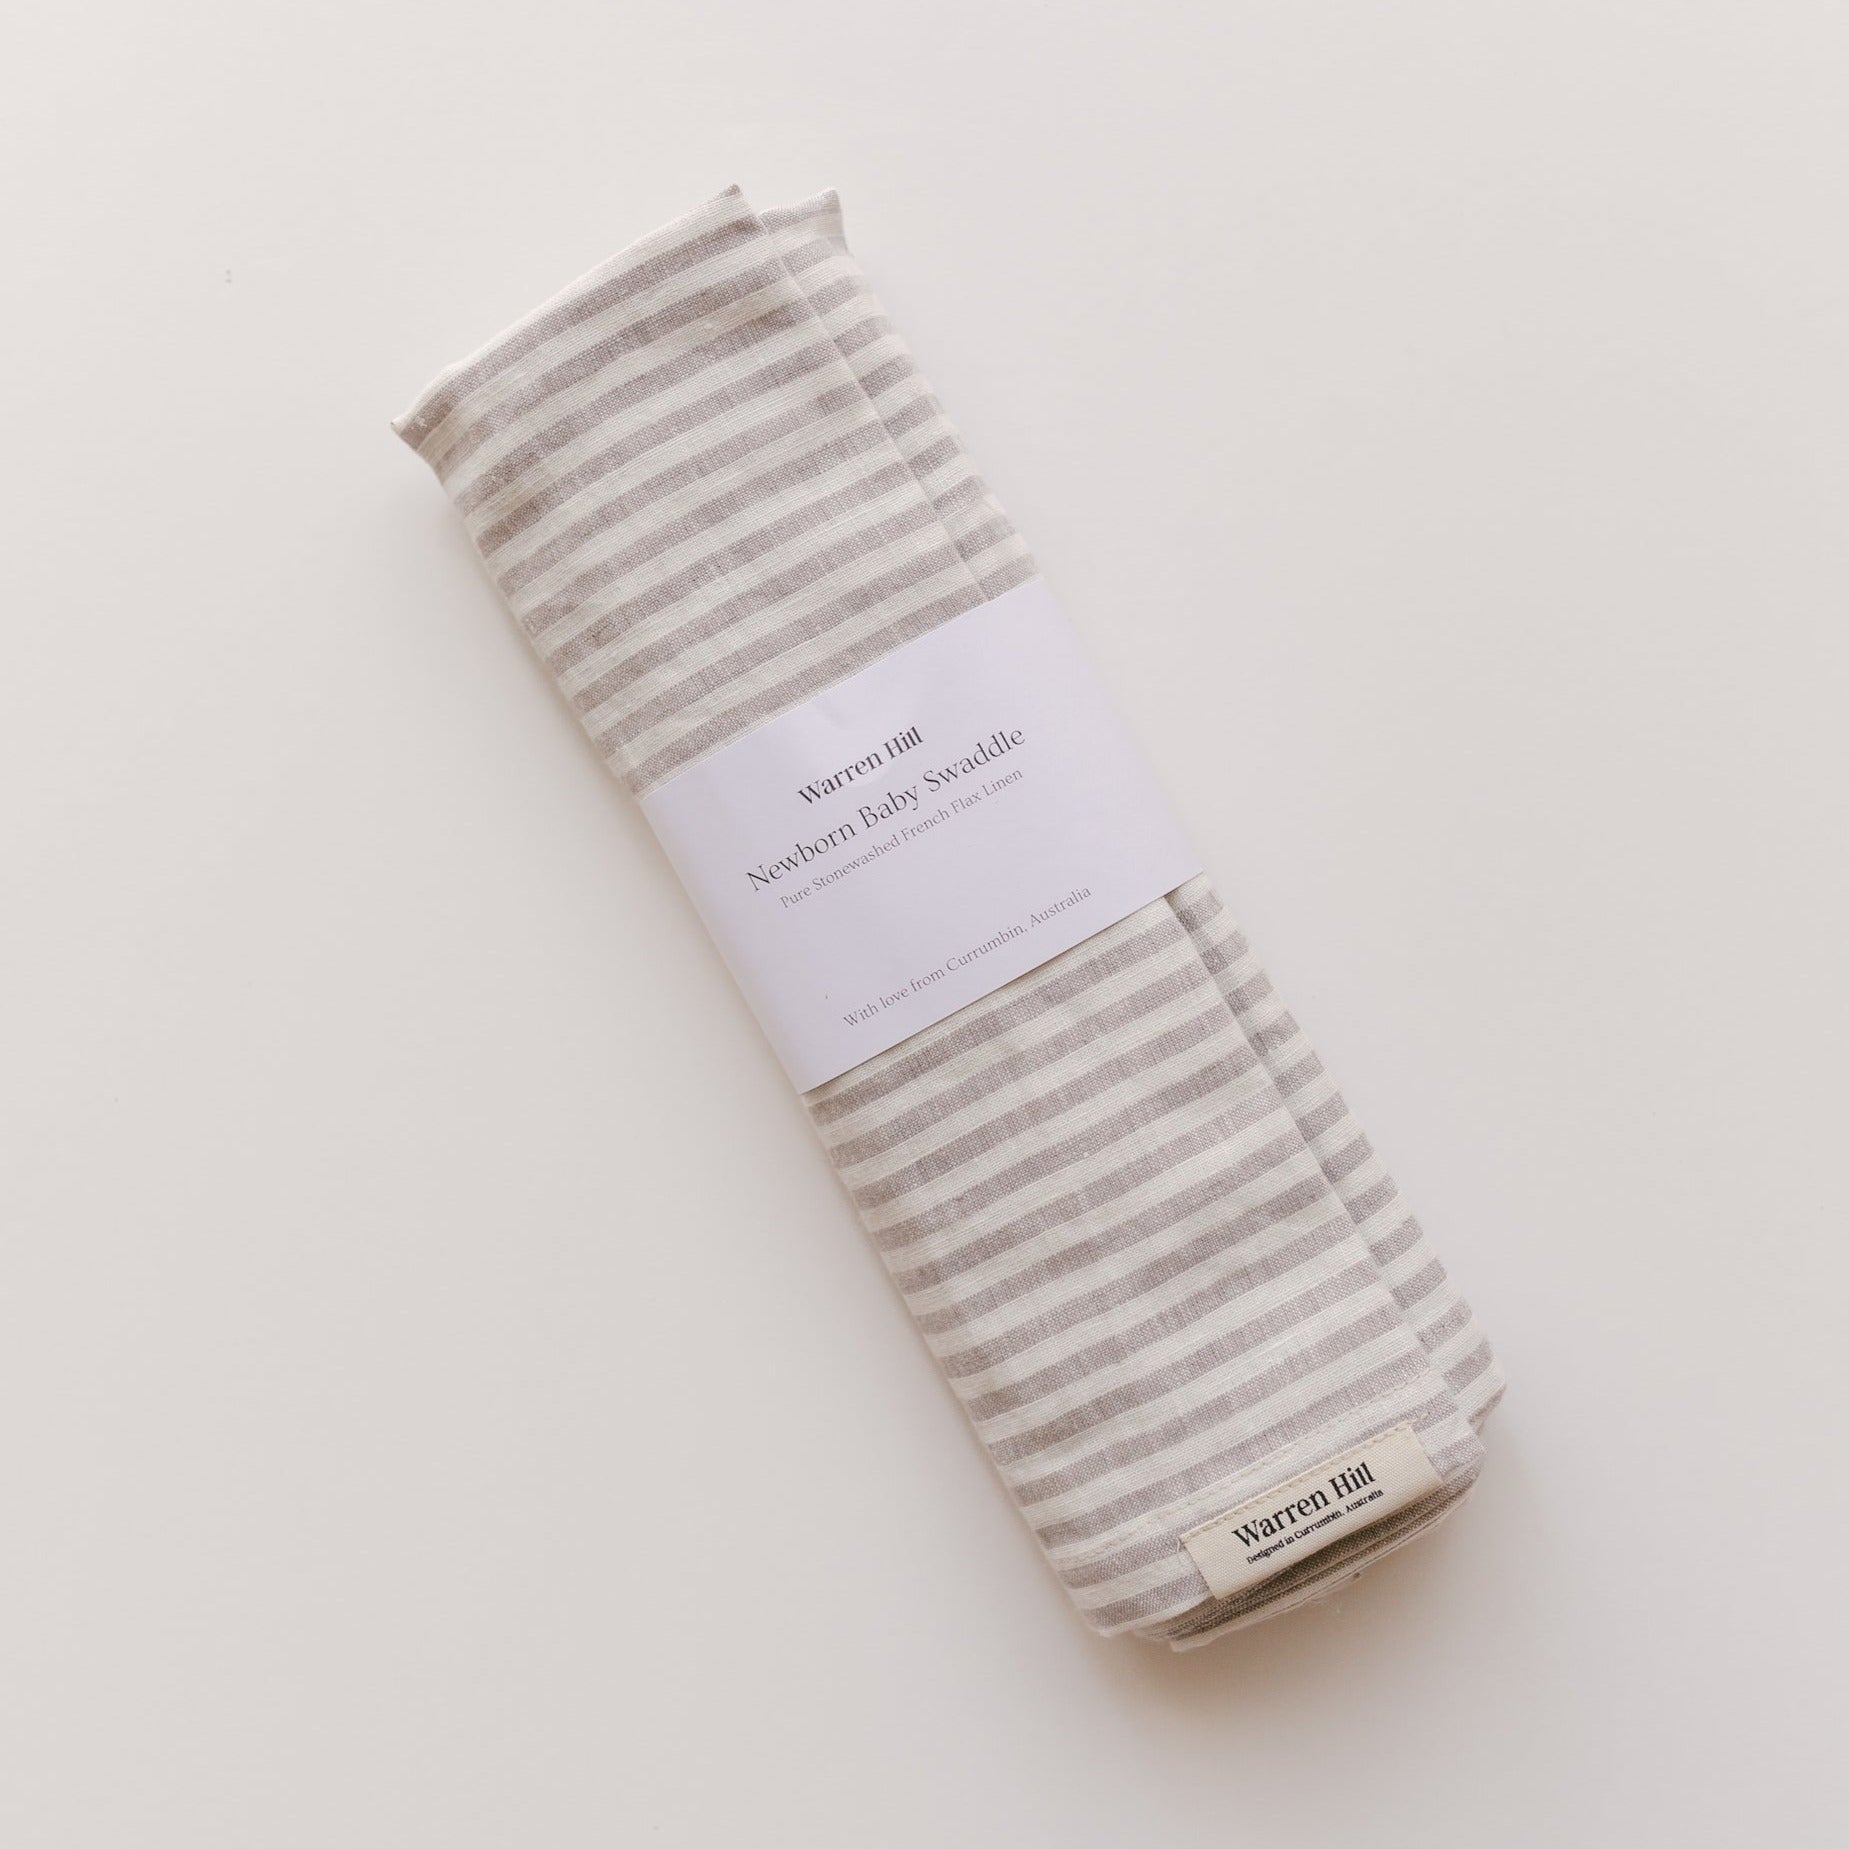 A Warren Hill french linen baby swaddle in grey stripe made of breathable stonewashed linen on a white surface.